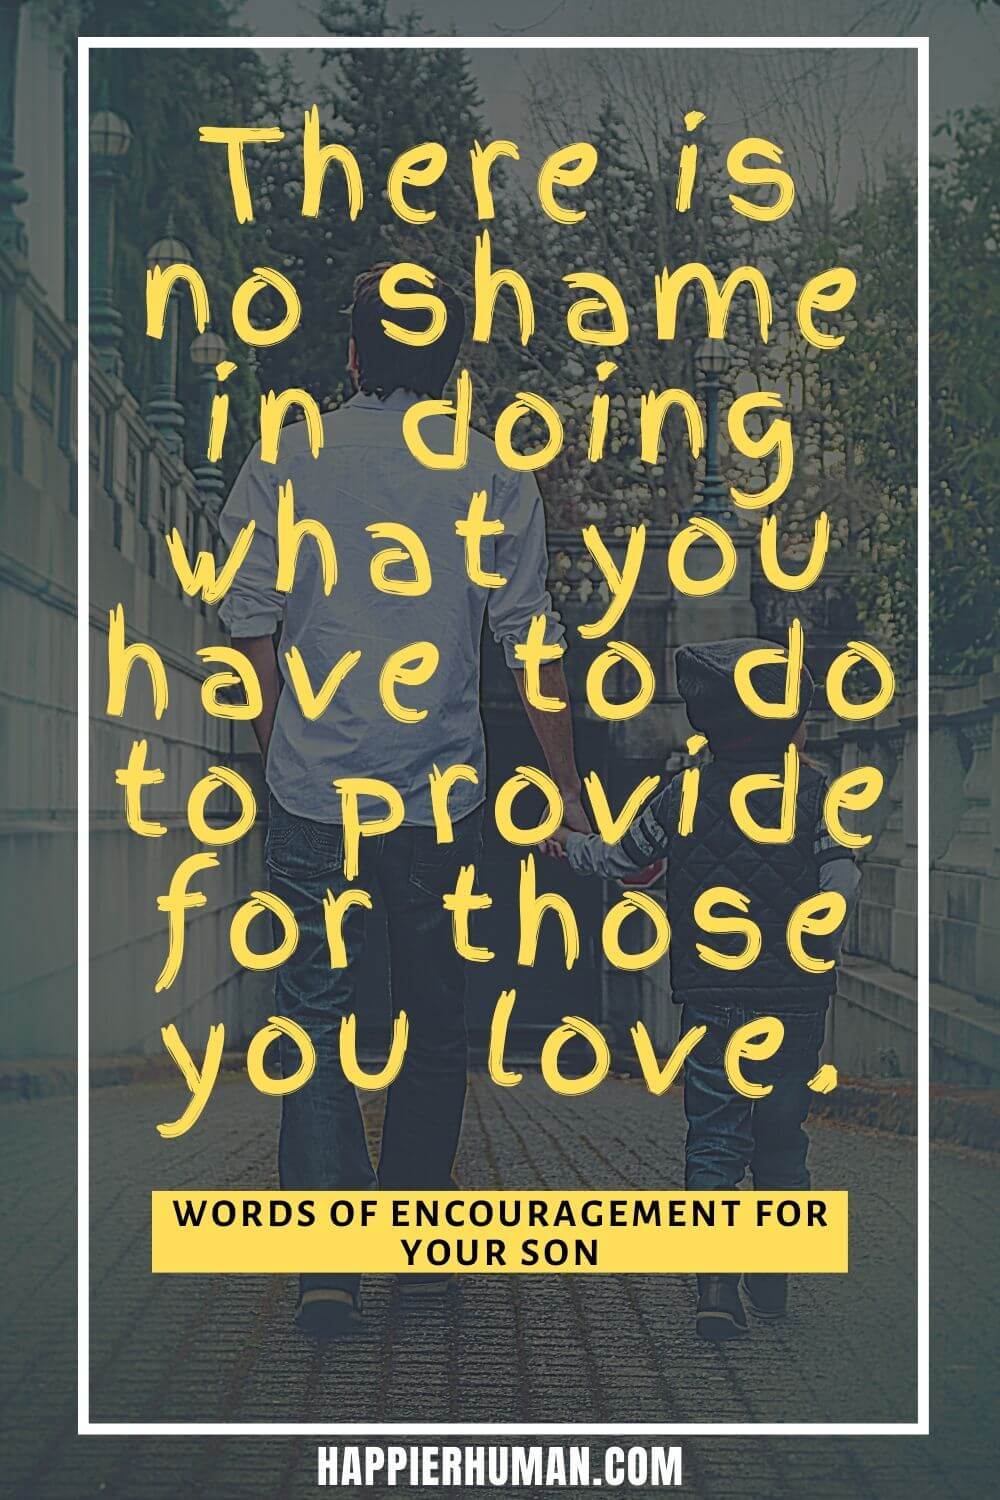 Words of Encouragement for a Son - There is no shame in doing what you have to do to provide for those you love. | words of wisdom for teenage son | words of encouragement for students | encouraging note for child #encouragingwordsforson #affirmationsweekly #sonandfather